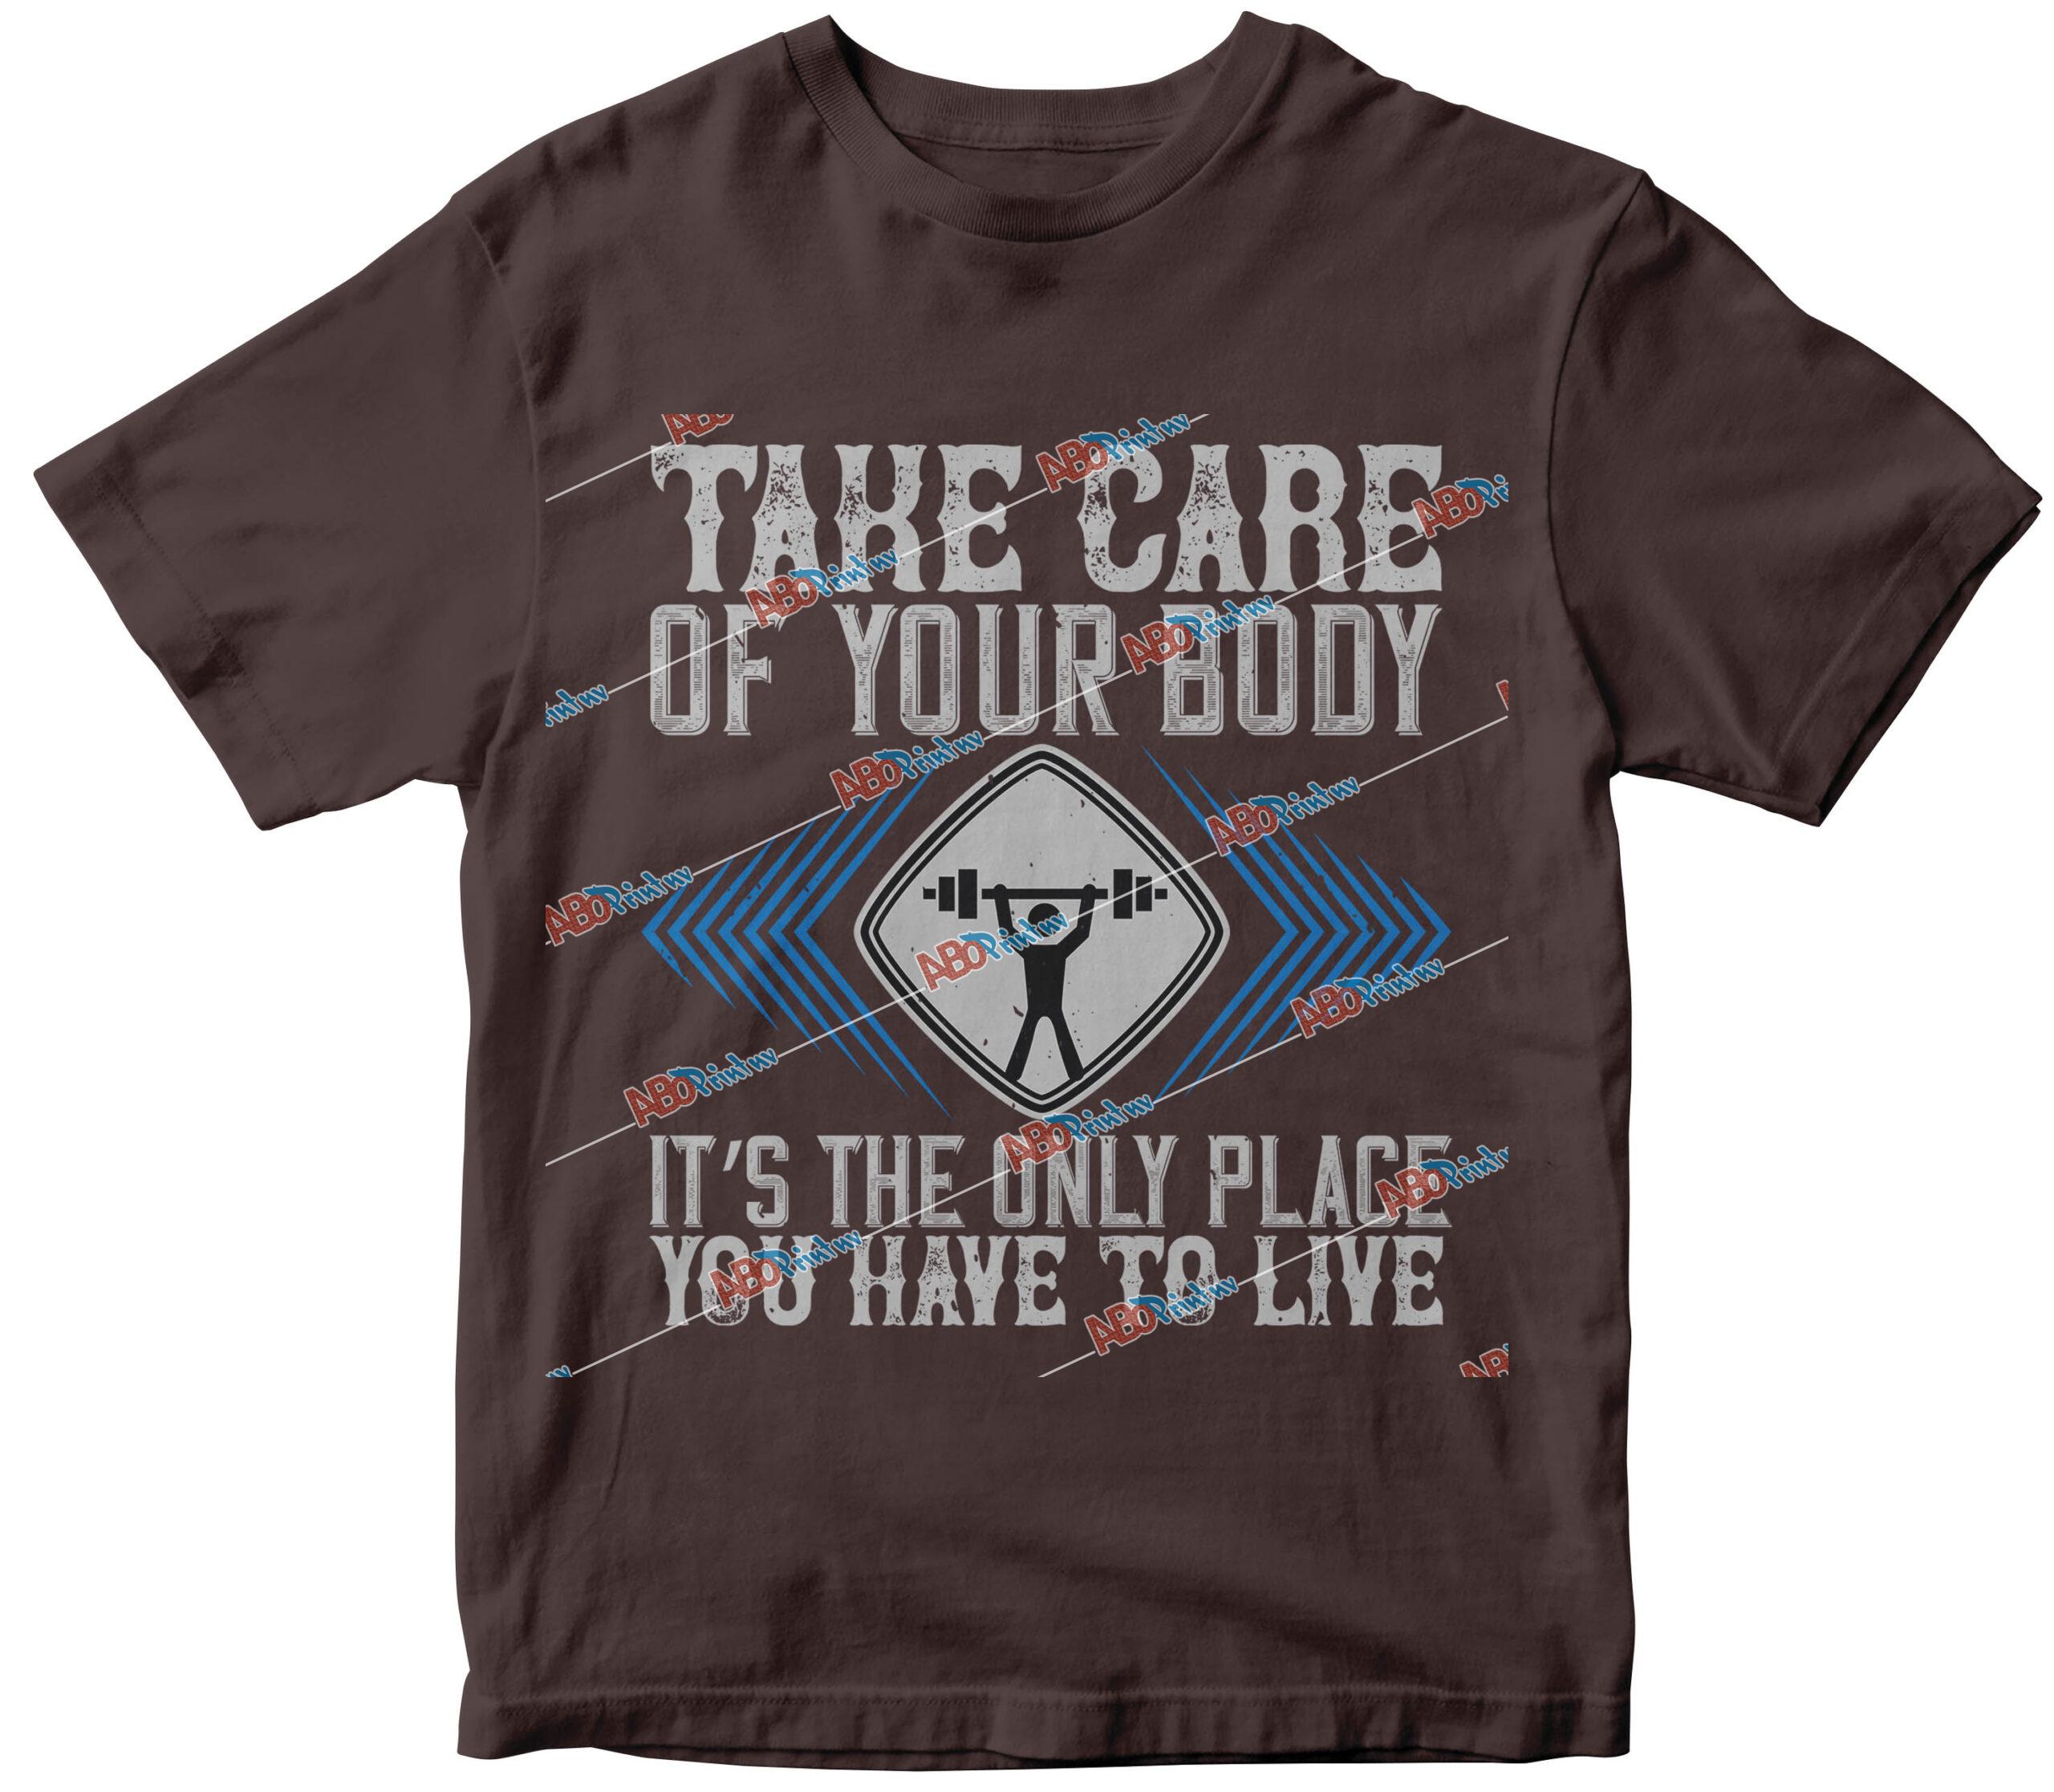 Take care of your body. ItÔÇÖs the only place you have to live.jpg